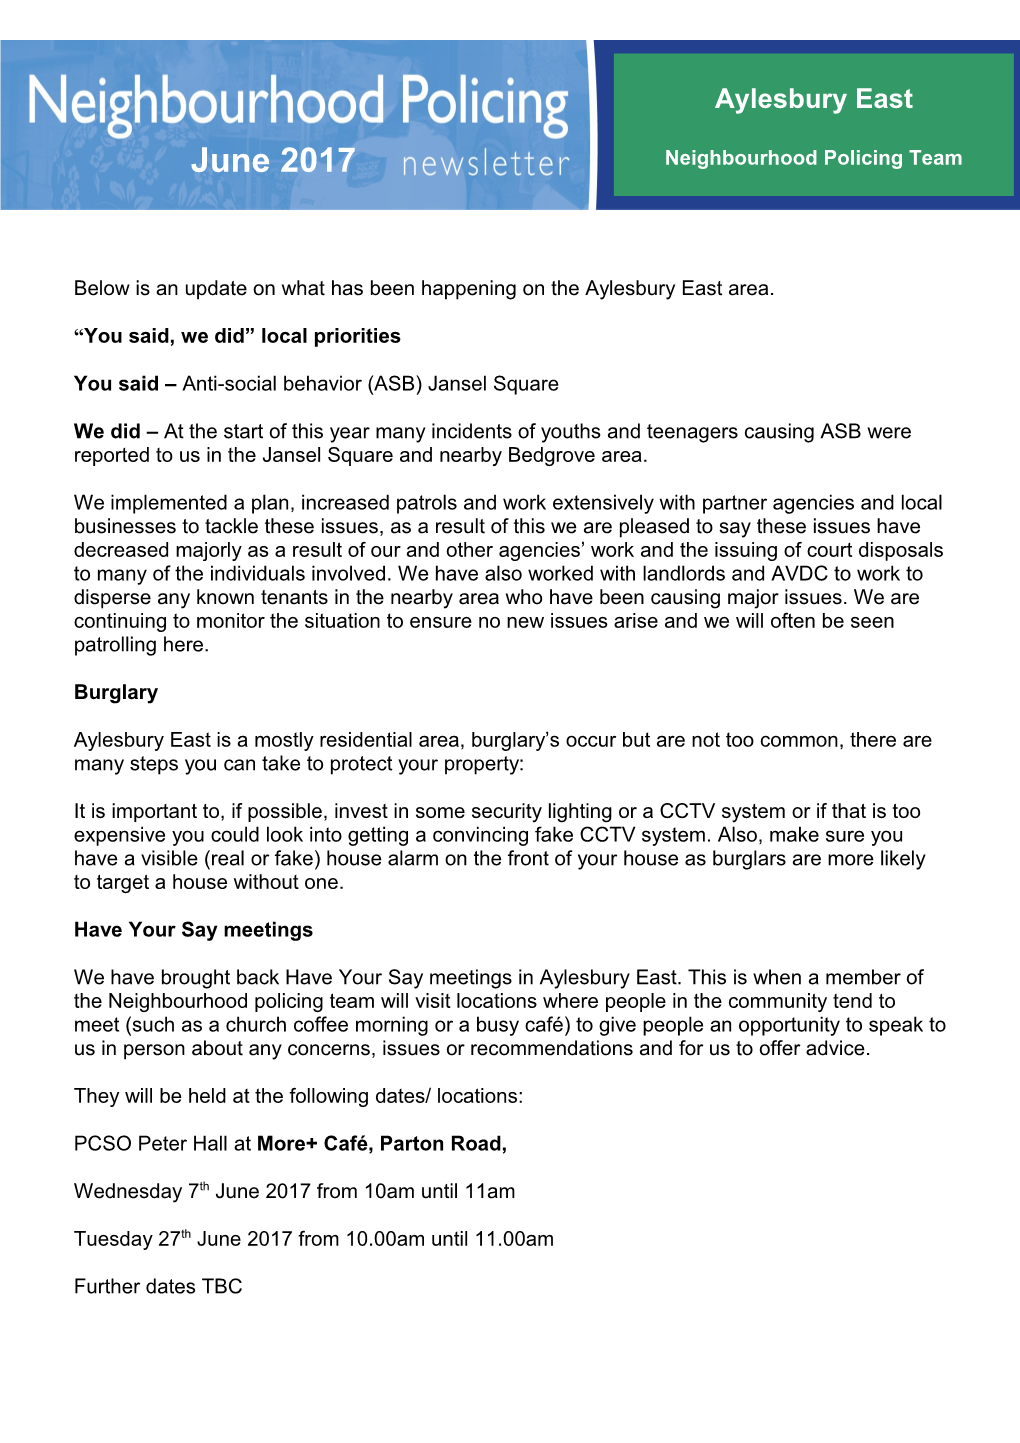 Below Is an Update on What Has Been Happening on the Aylesbury East Area